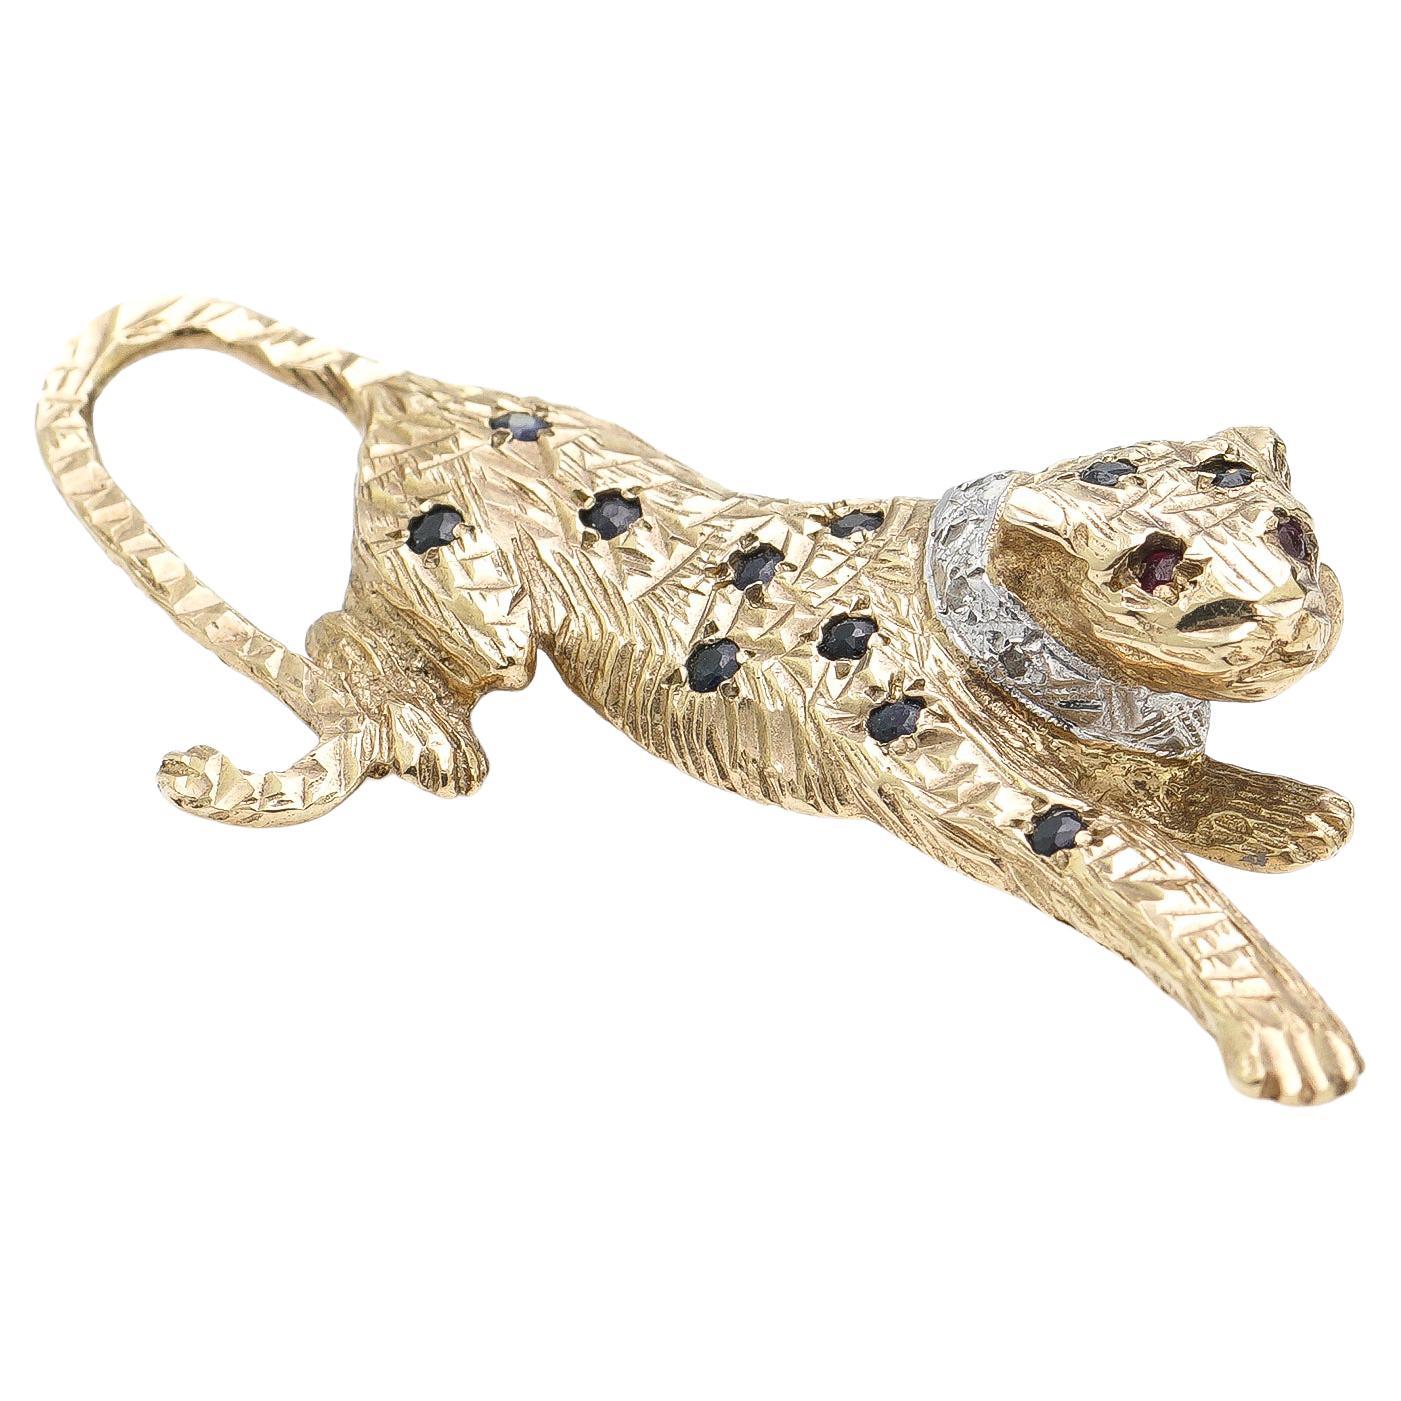 Vintage 9 Kt Gold Leopard Brooch with Diamonds, Sapphires and Rubies, 1970's